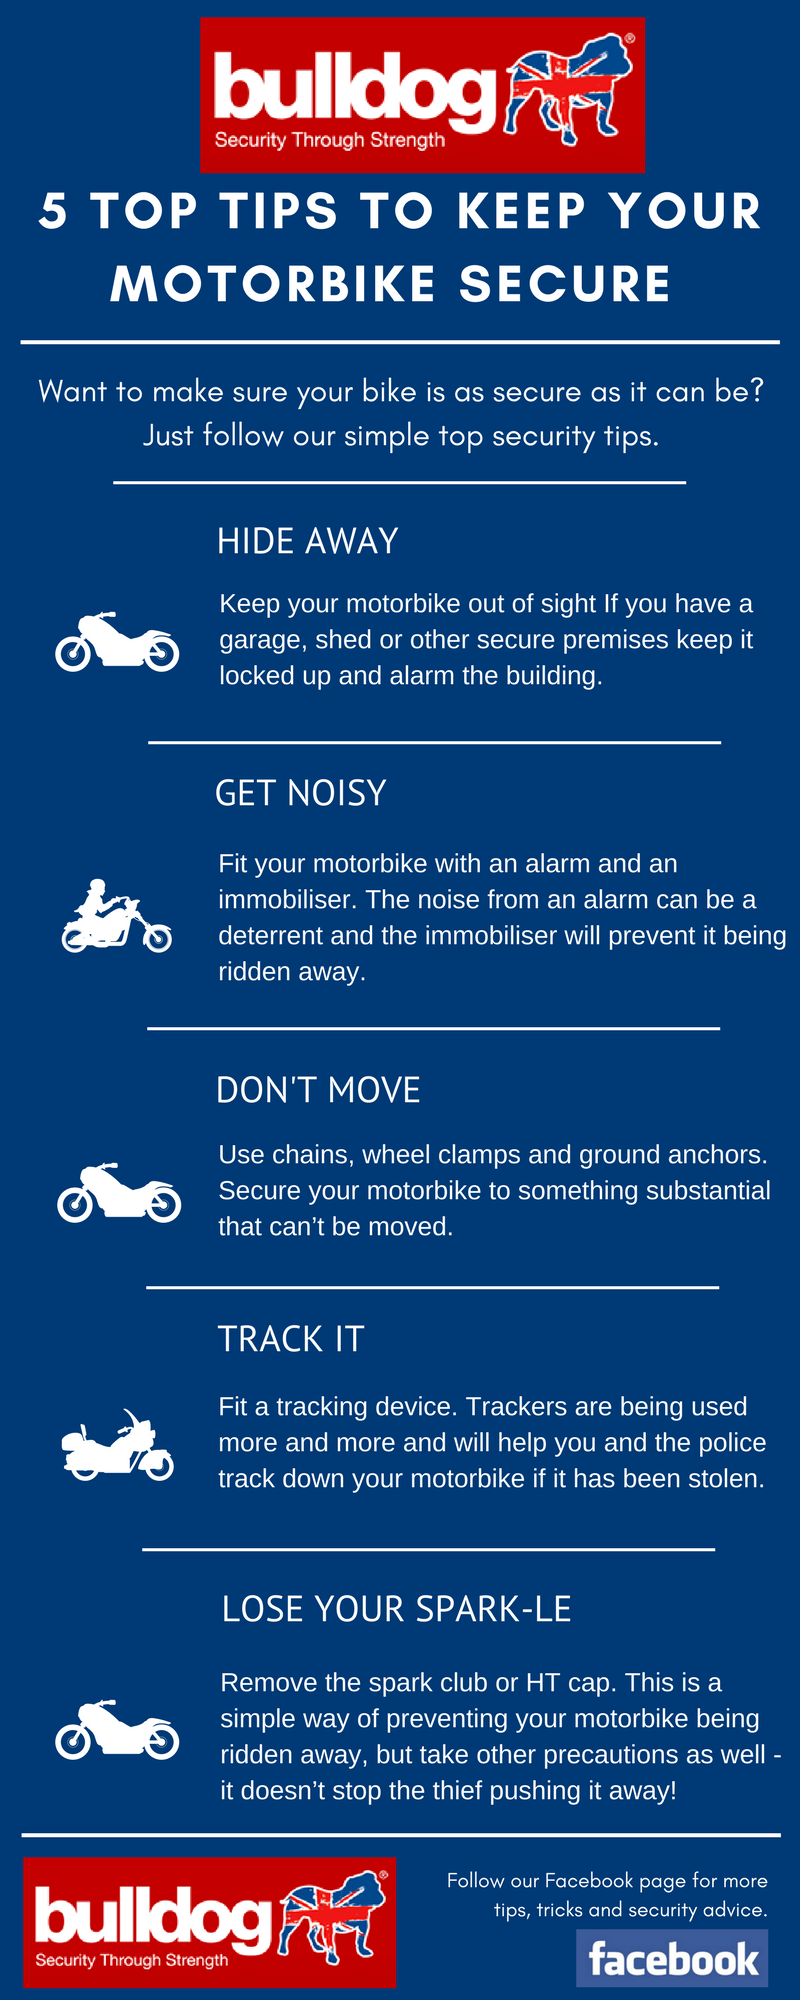 5 top tips to keep your motorbike secure